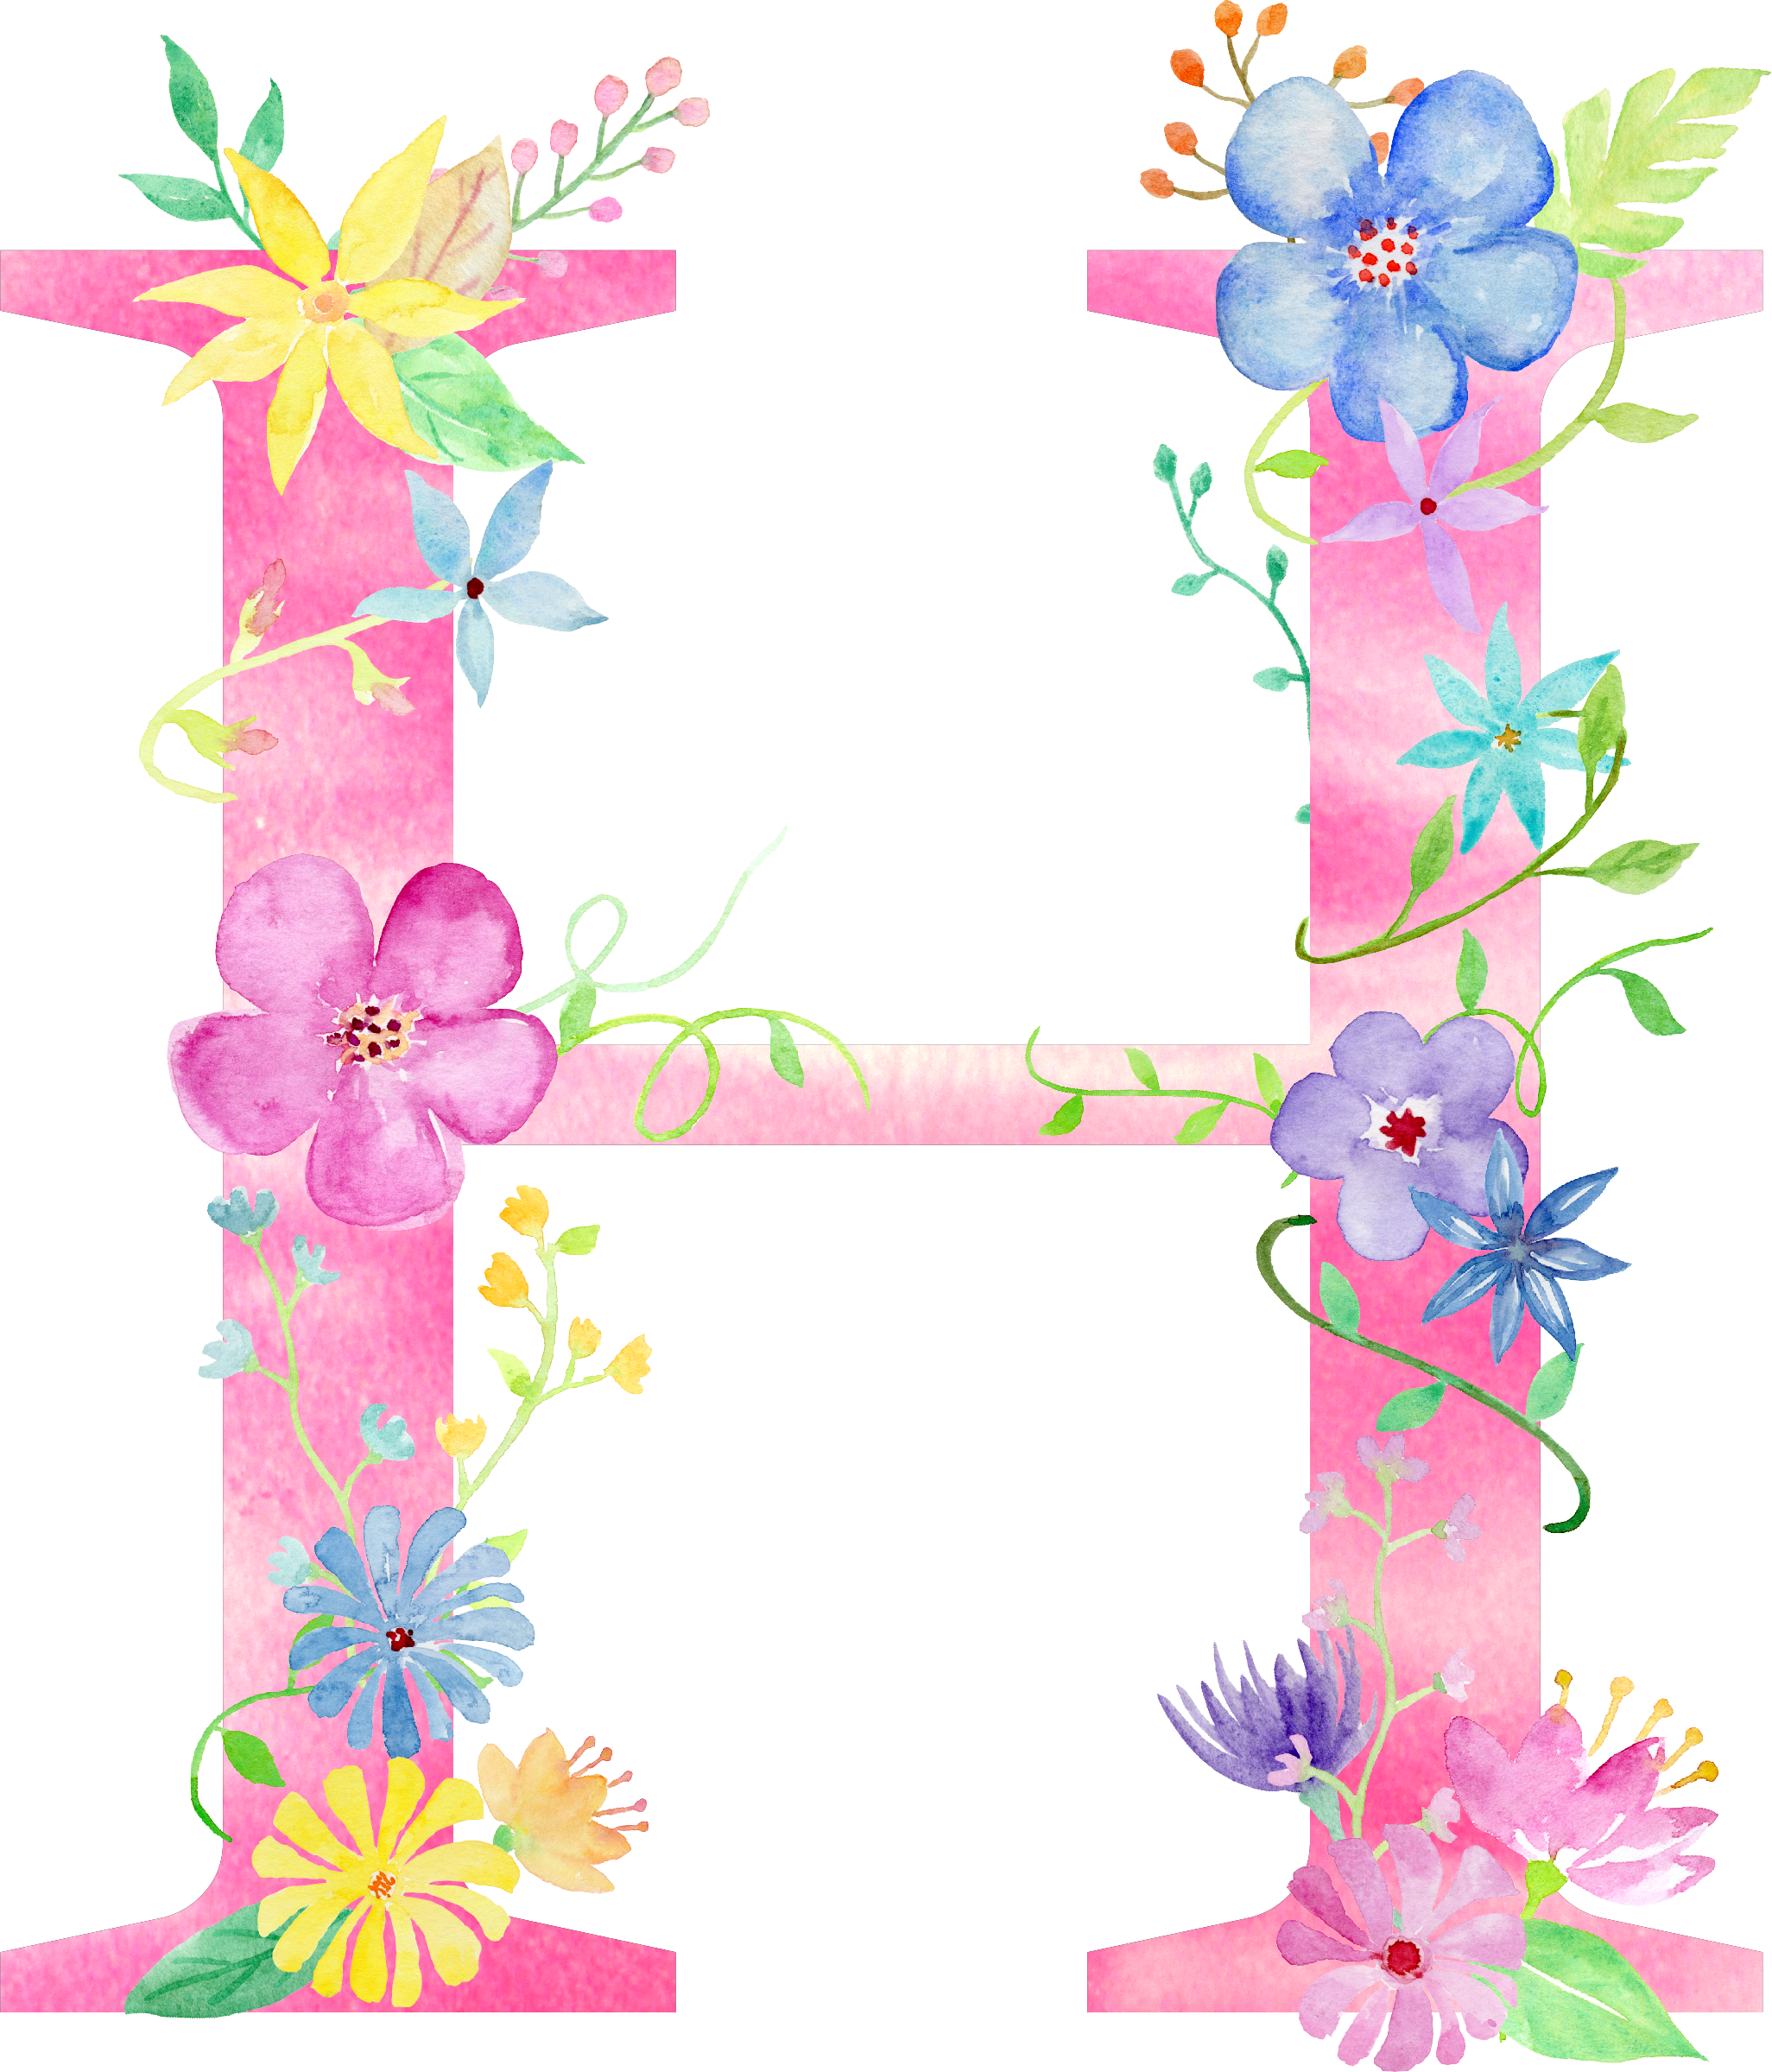 Alphabet Flower PNG Image High Quality PNG Image